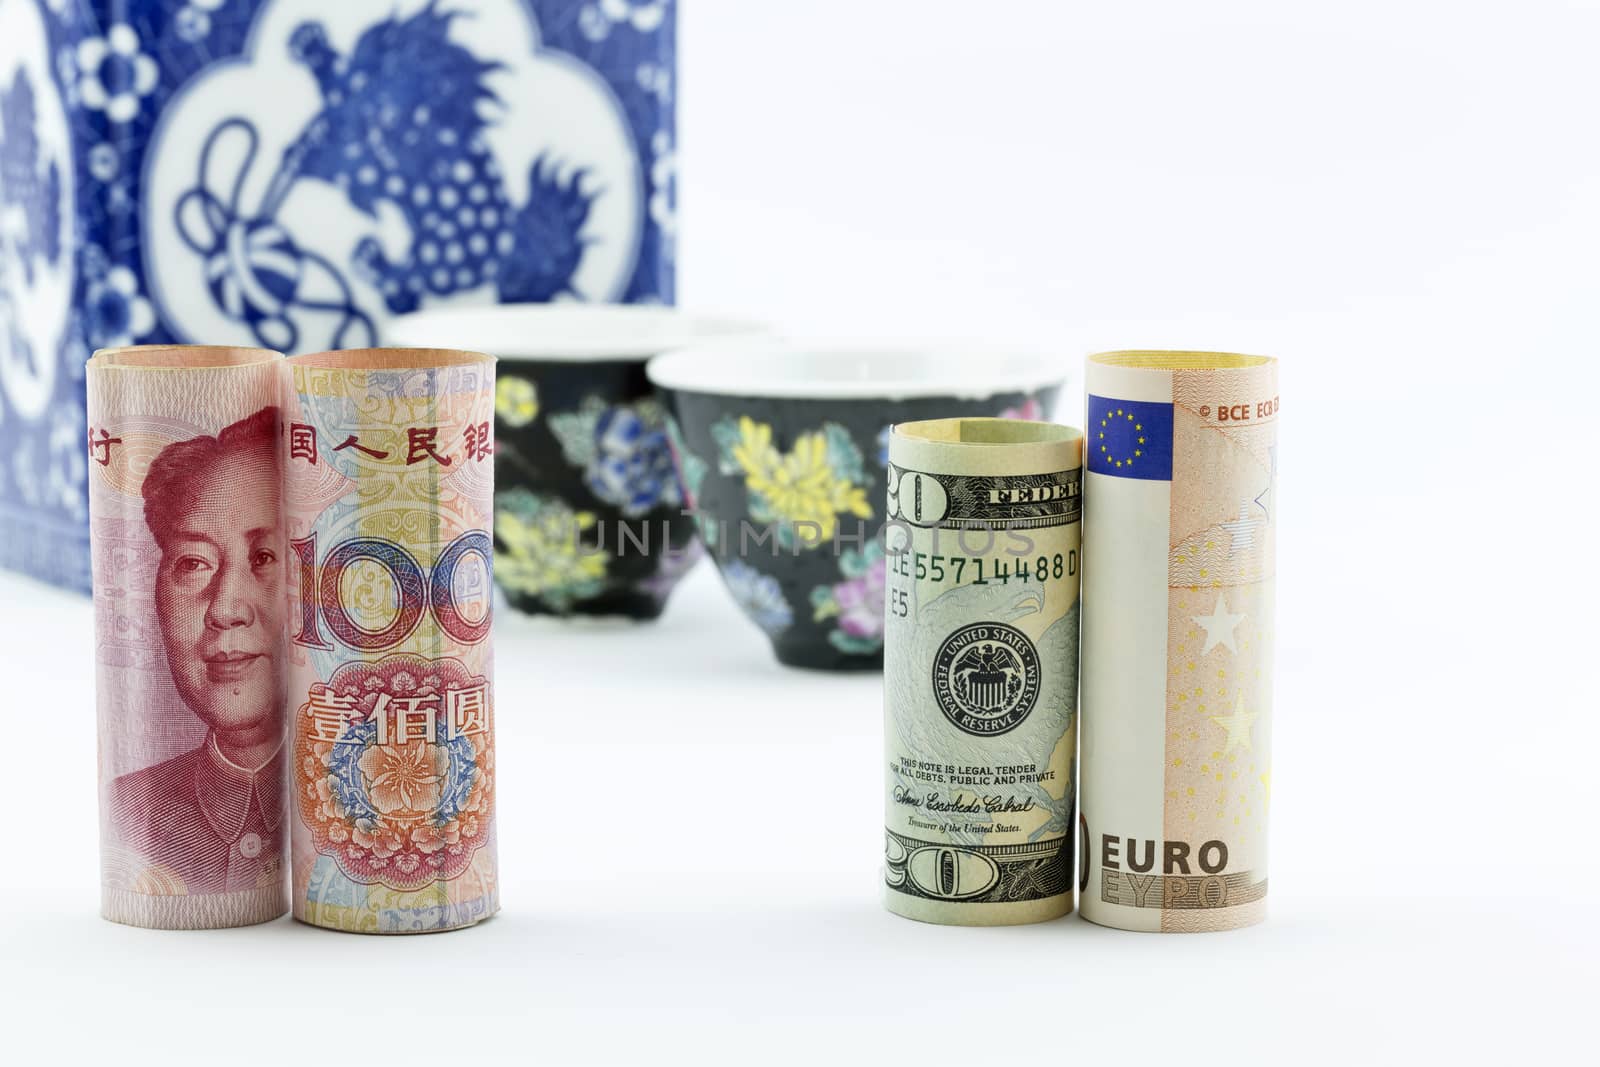 Chinese yuan currency, American money, and European Union euro stand in front of Asian porcelain tea cups and storage jar suggesting Asian meeting and business finance discussions. 